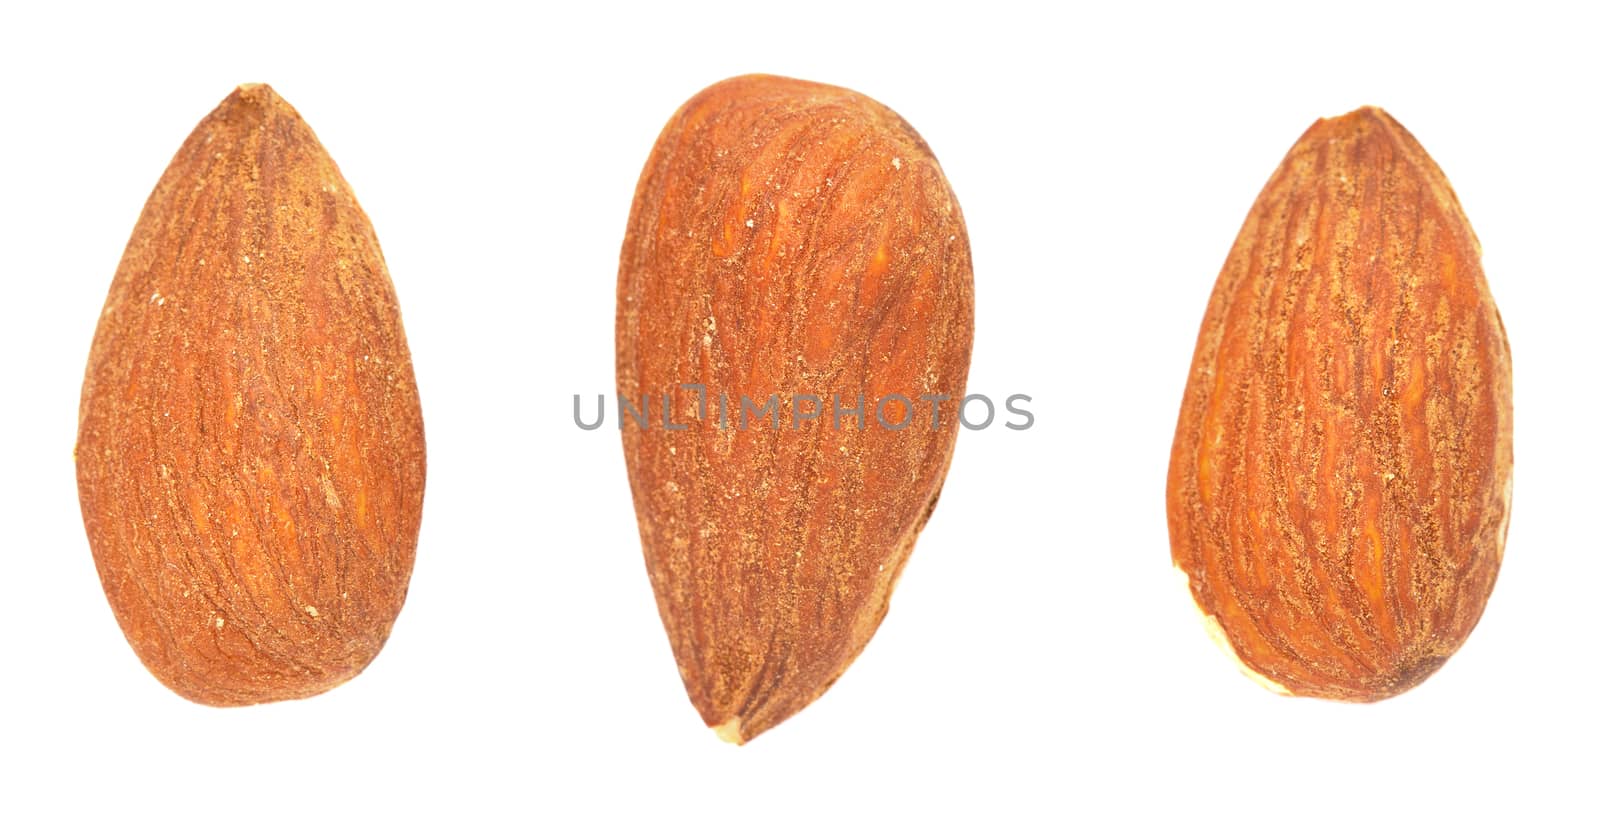 Almond kernels on a white background by 25ehaag6